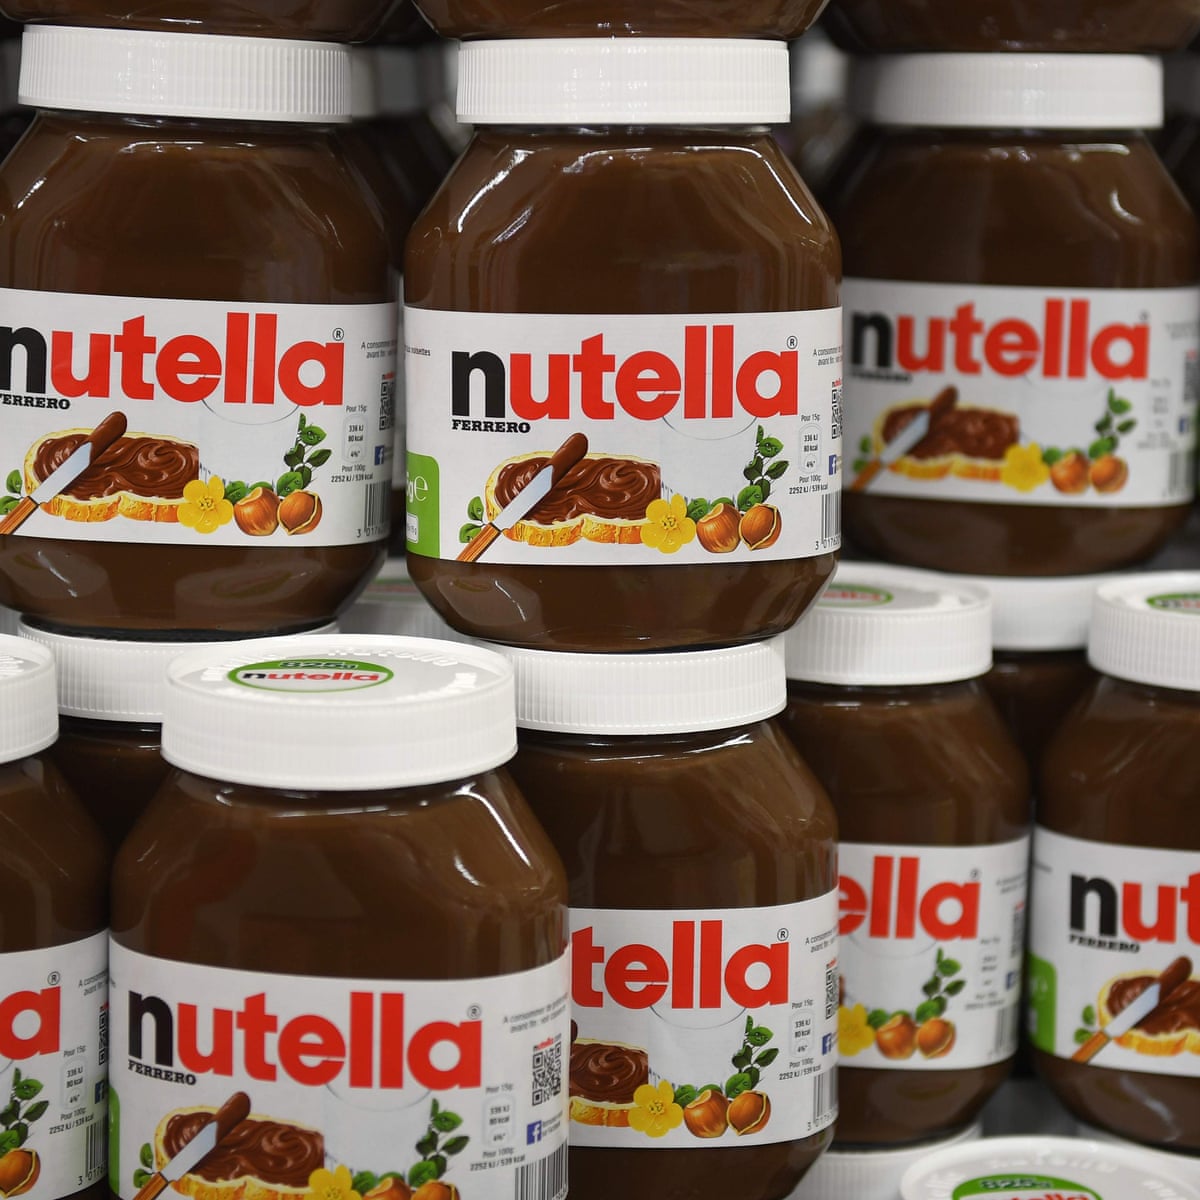 Nutella and more brand names you're pronouncing wrong